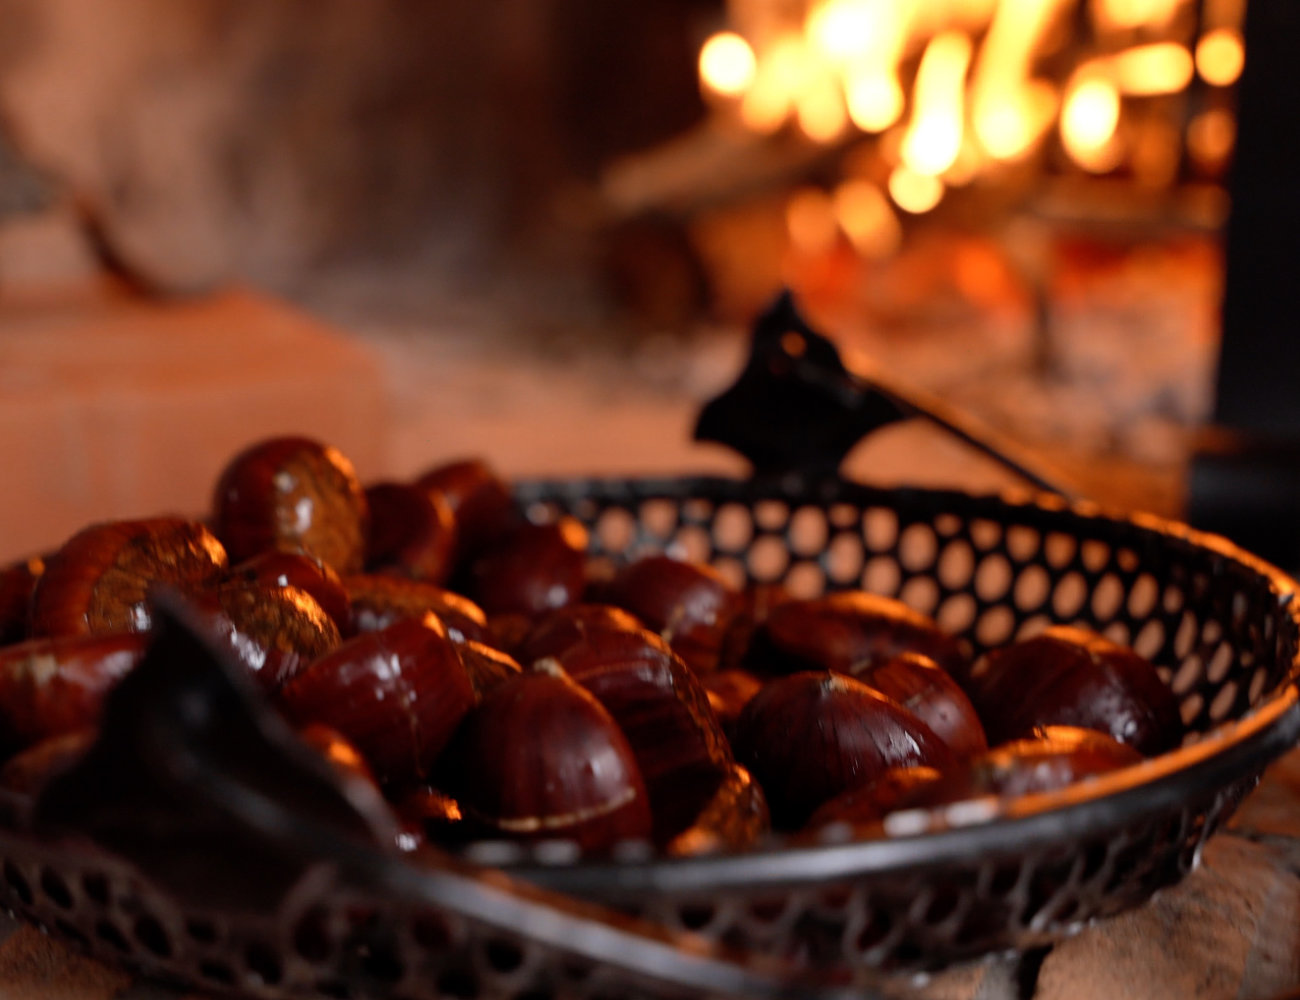 How To Roast Chestnuts Over An Open Fire